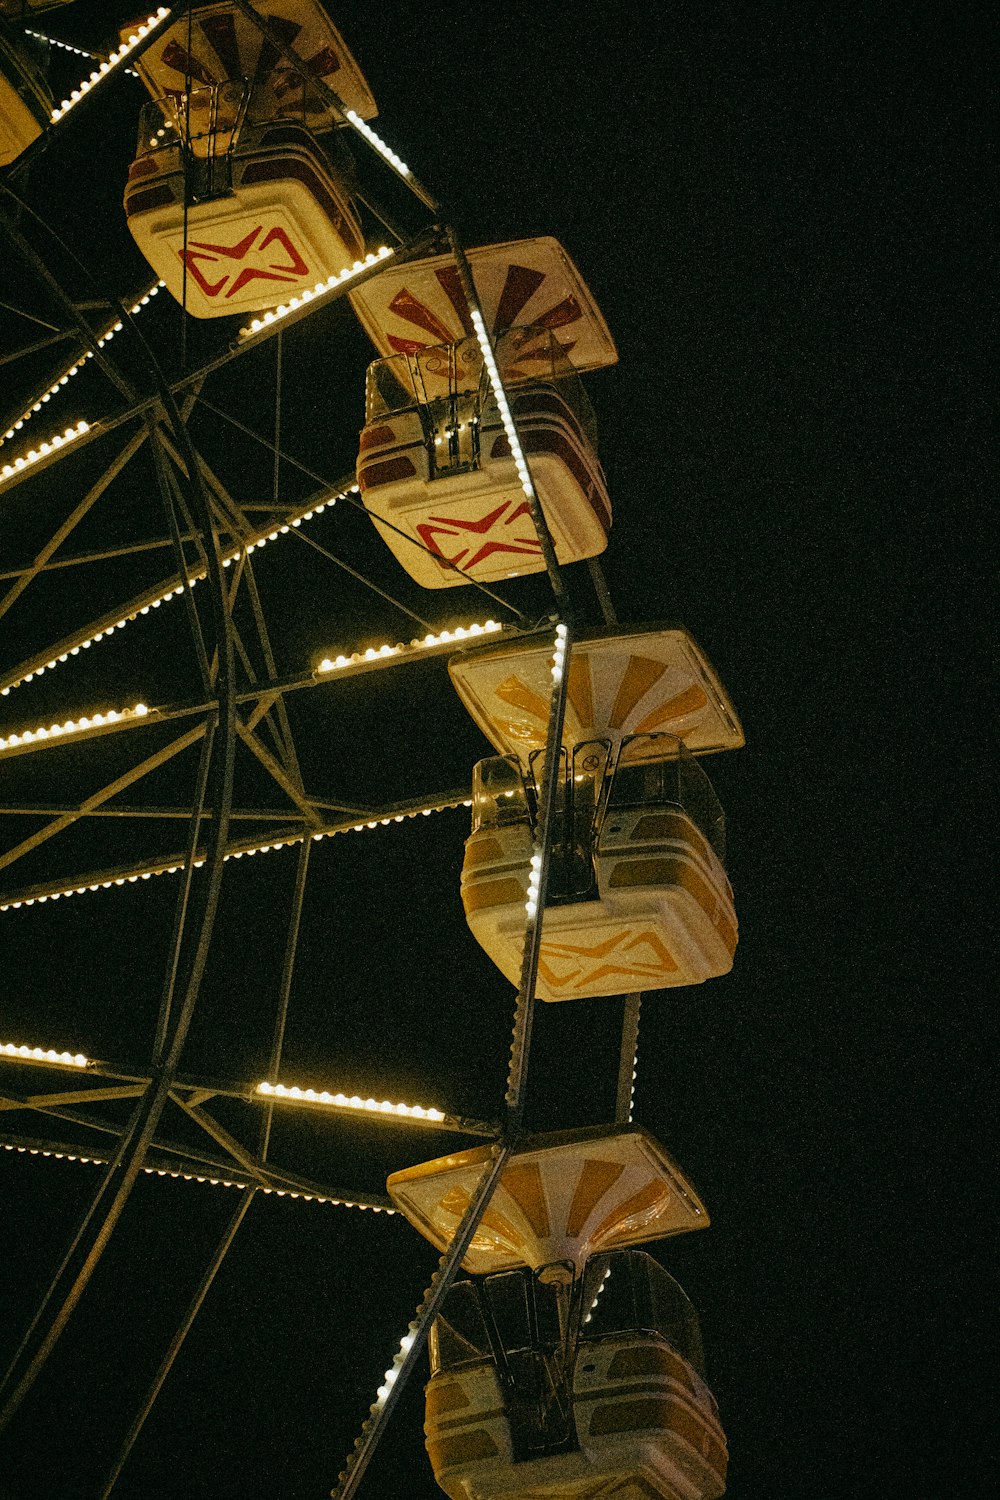 a ferris wheel lit up at night with lights